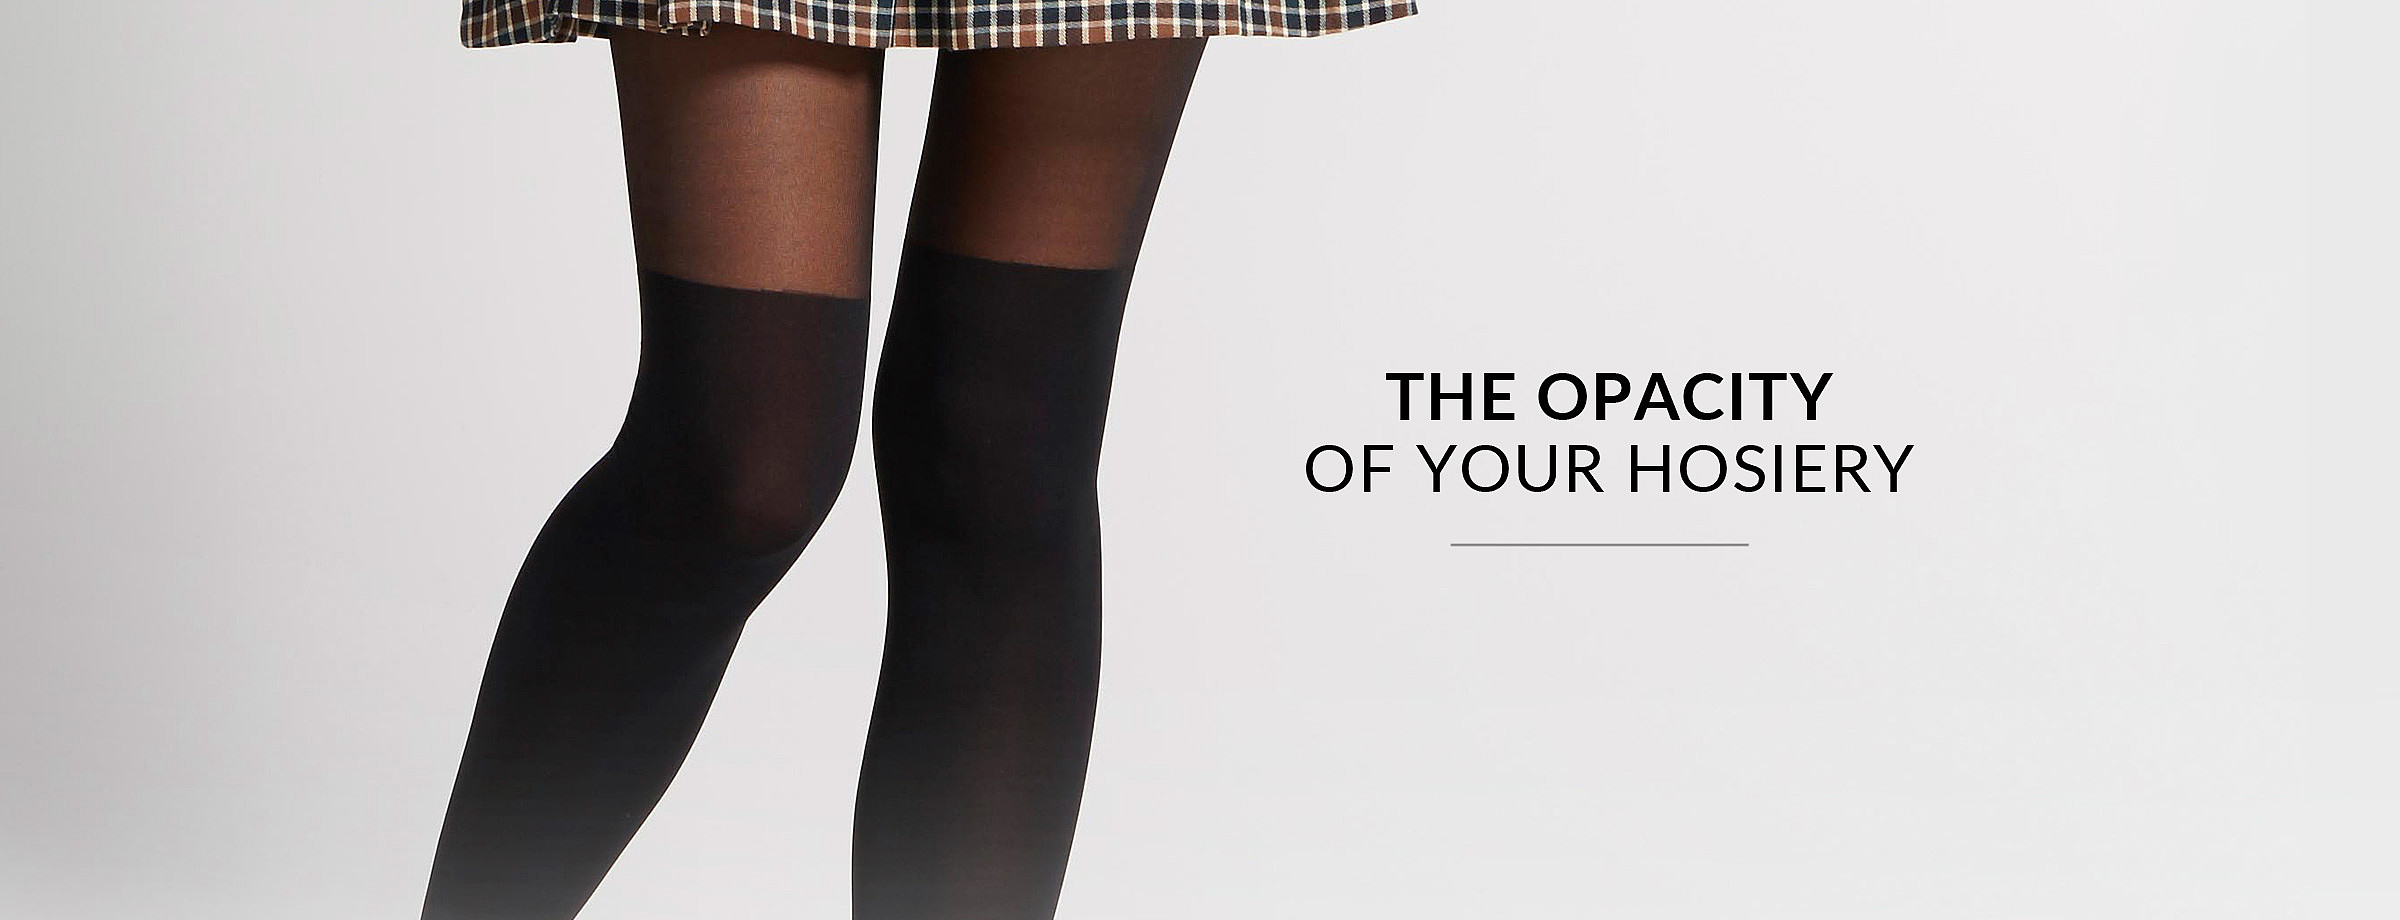 The opacity of your hosiery